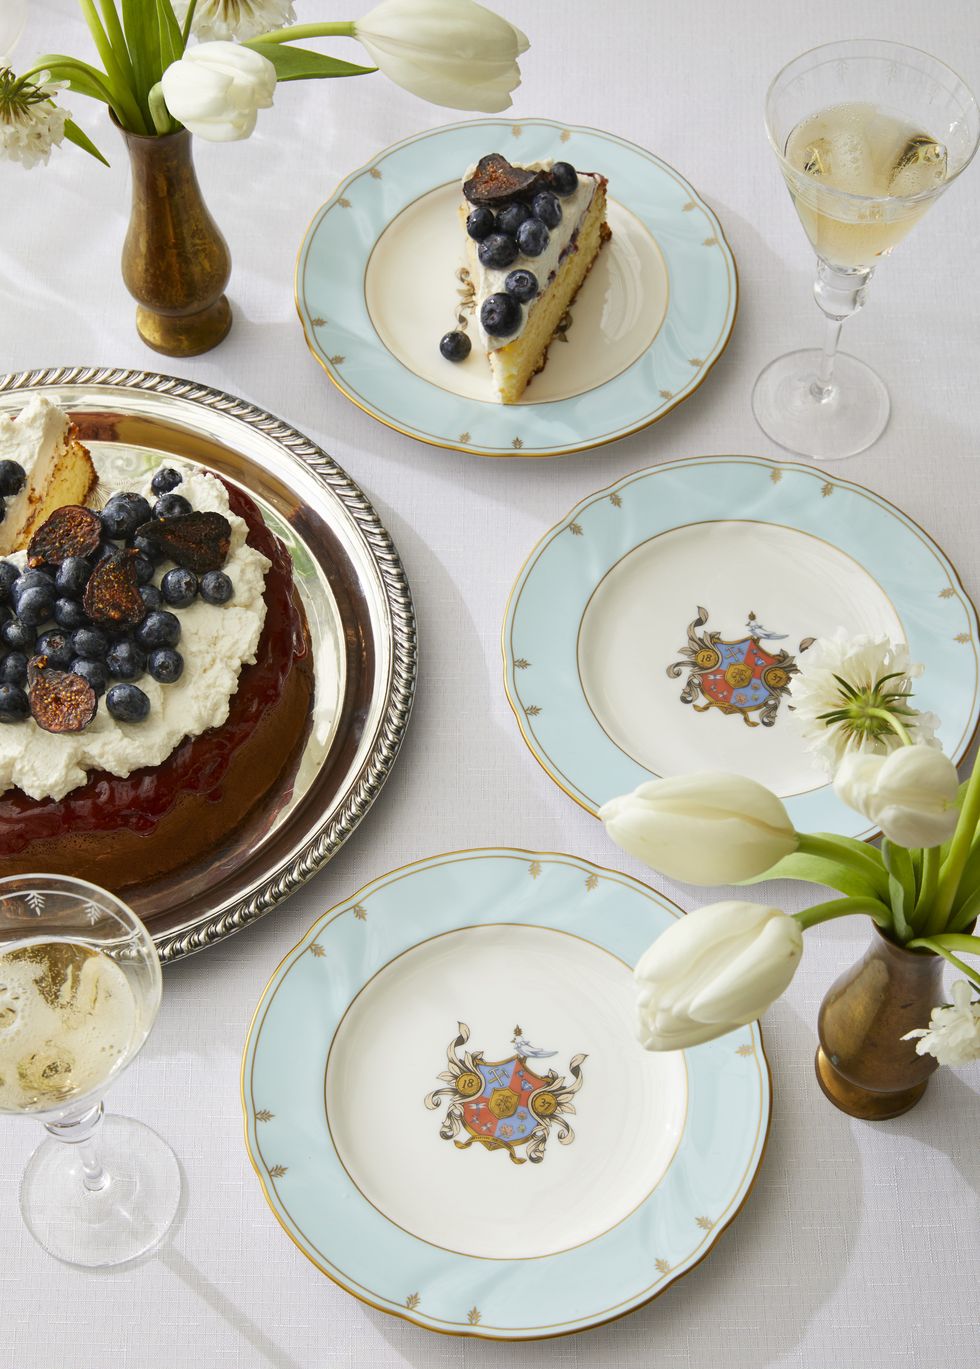 Tiffany T True Dessert Plate with a Hand-painted Gold Rim | Tiffany & Co.